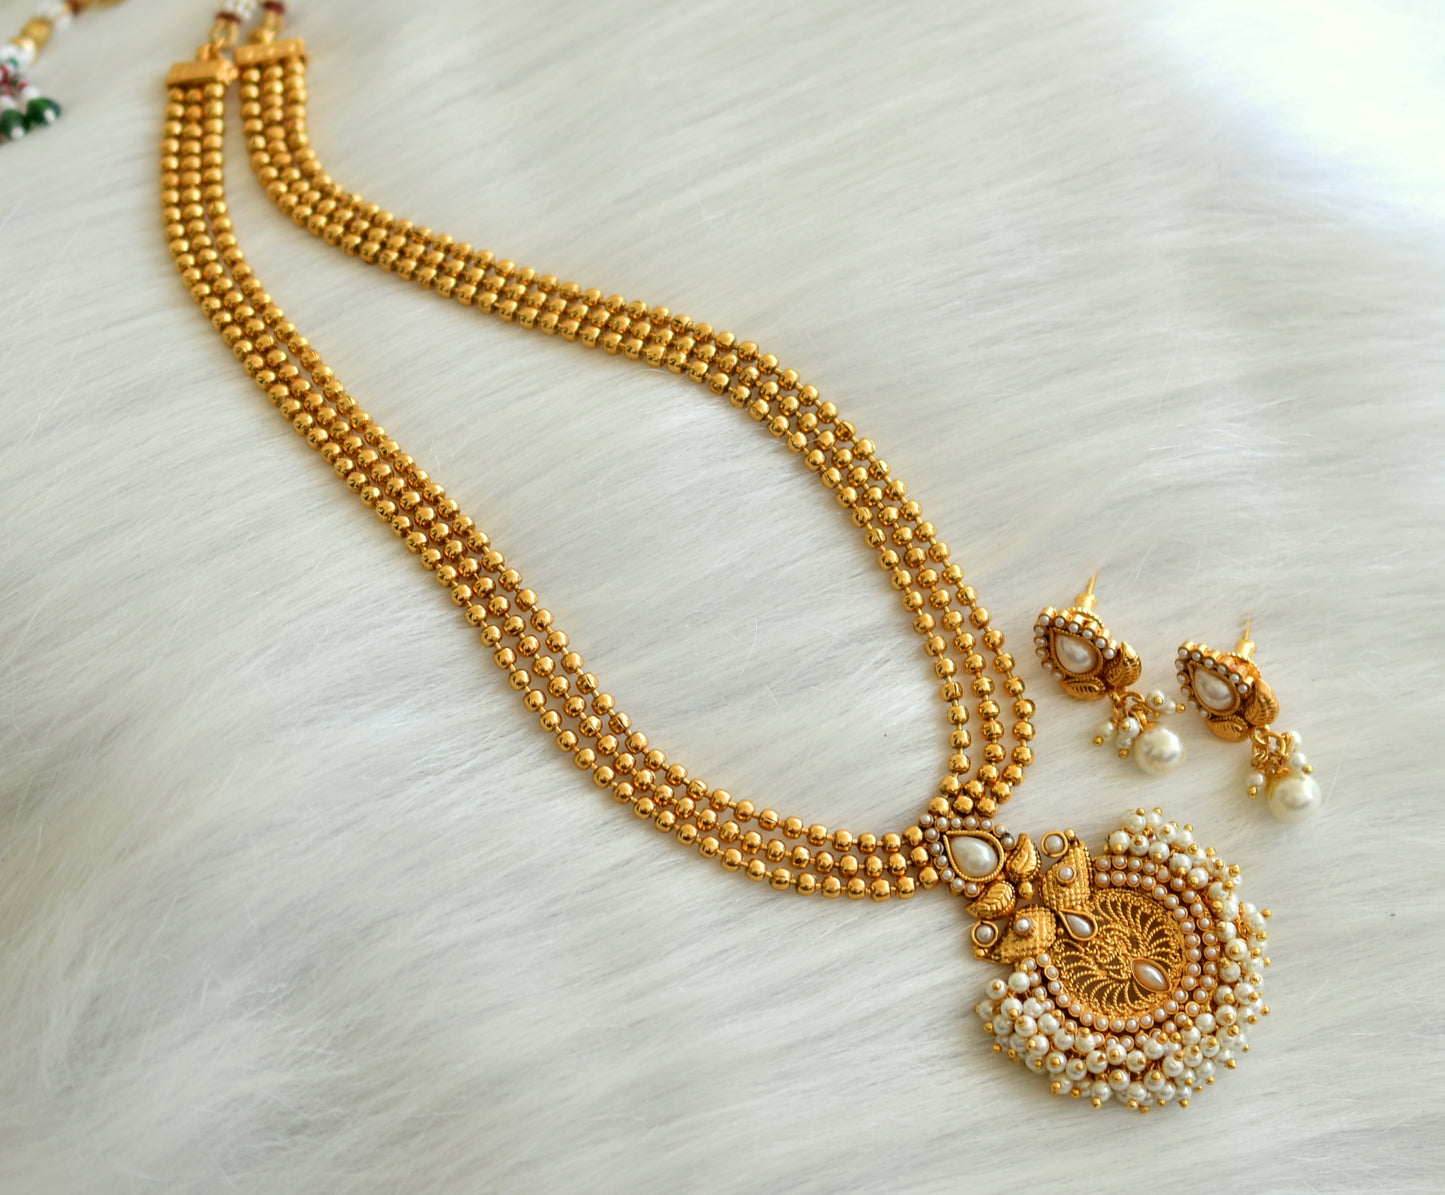 Antique ball chain pearl cluster necklace set dj-16507